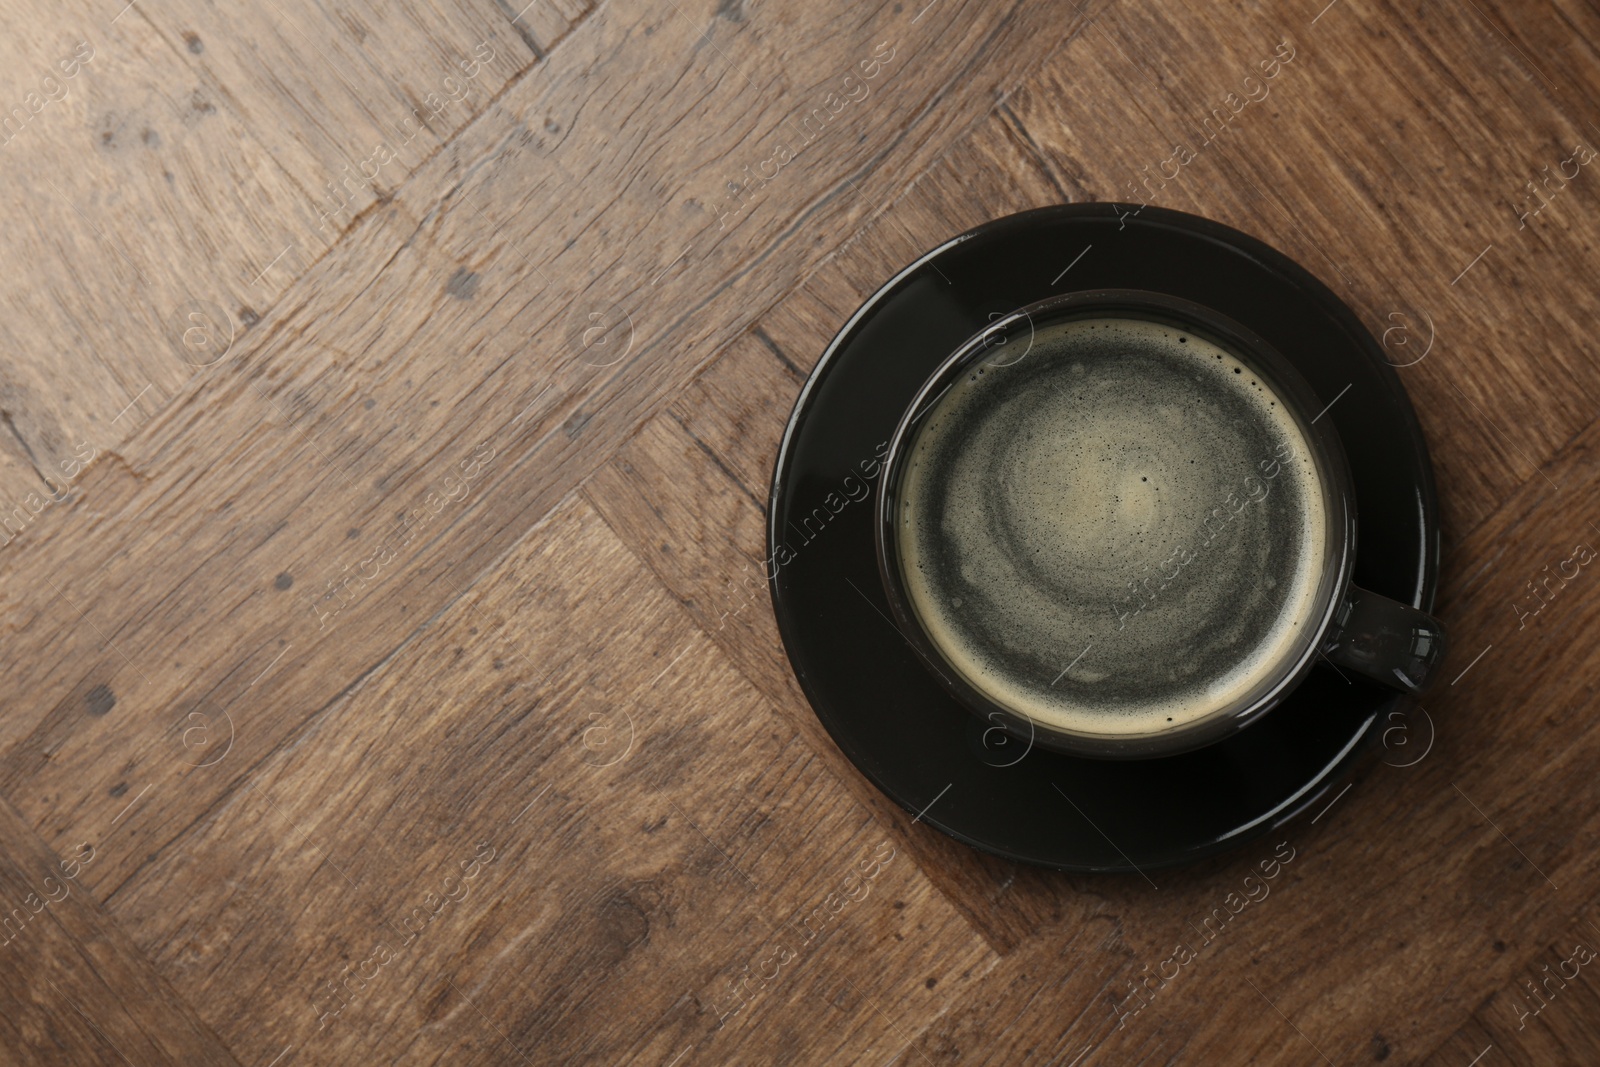 Photo of Hot coffee in cup on wooden table, top view. Space for text